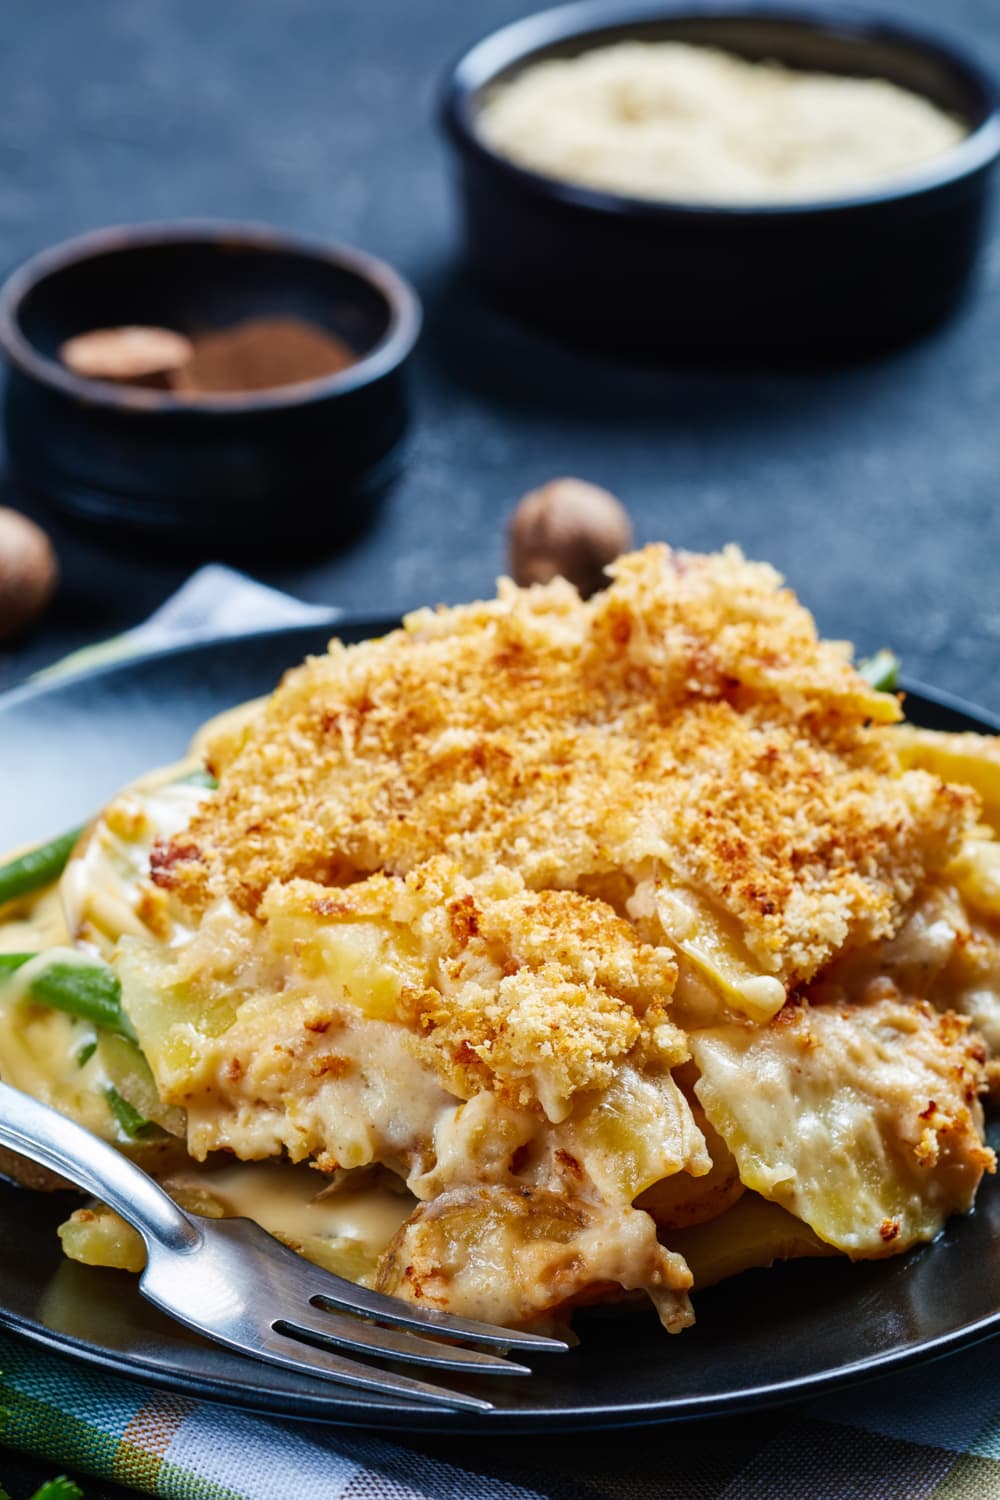 A serving of potato casserole with crumbly toppings on a black plate.